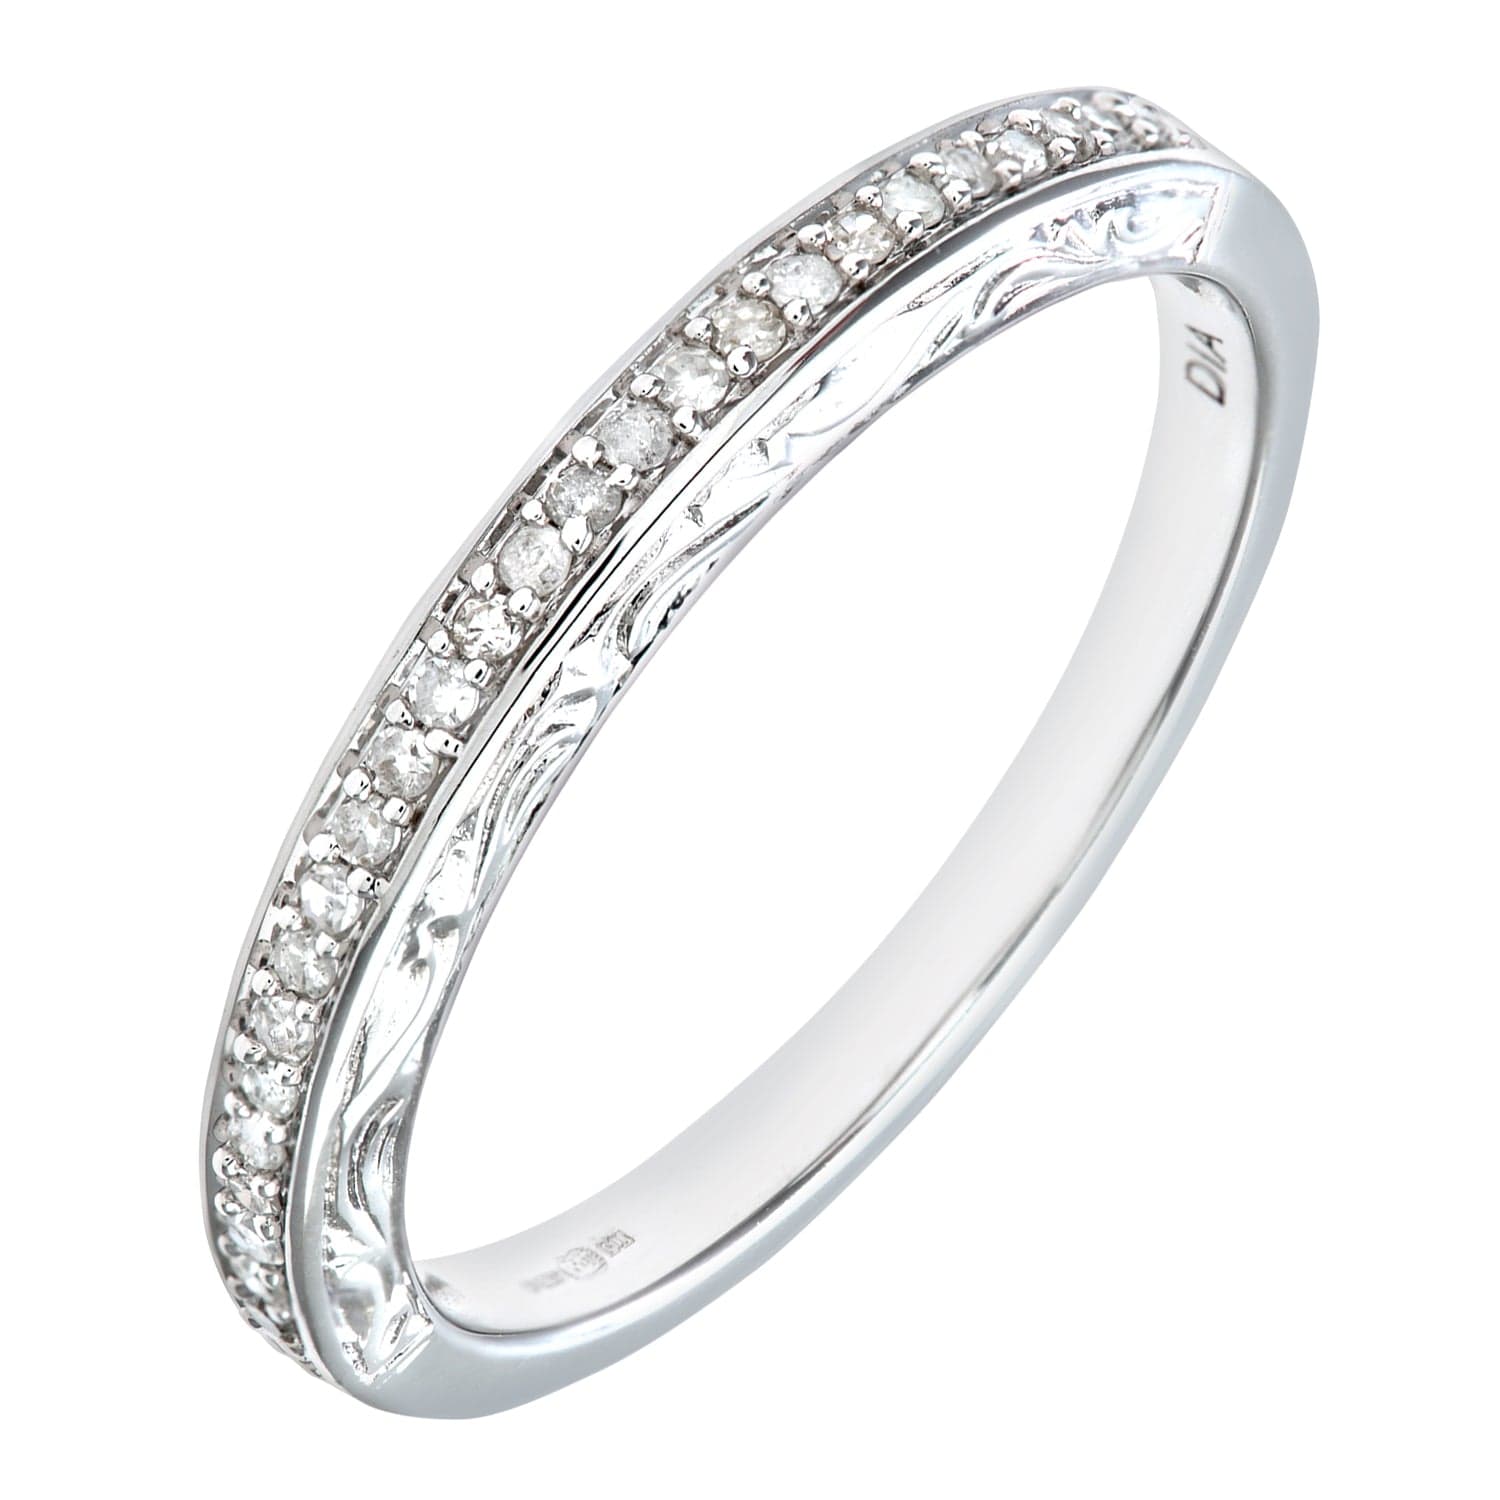 Lynora Luxe Ring White Gold 9ct / Diamond 9ct White Gold 0.10ct Diamond Eternity Ring